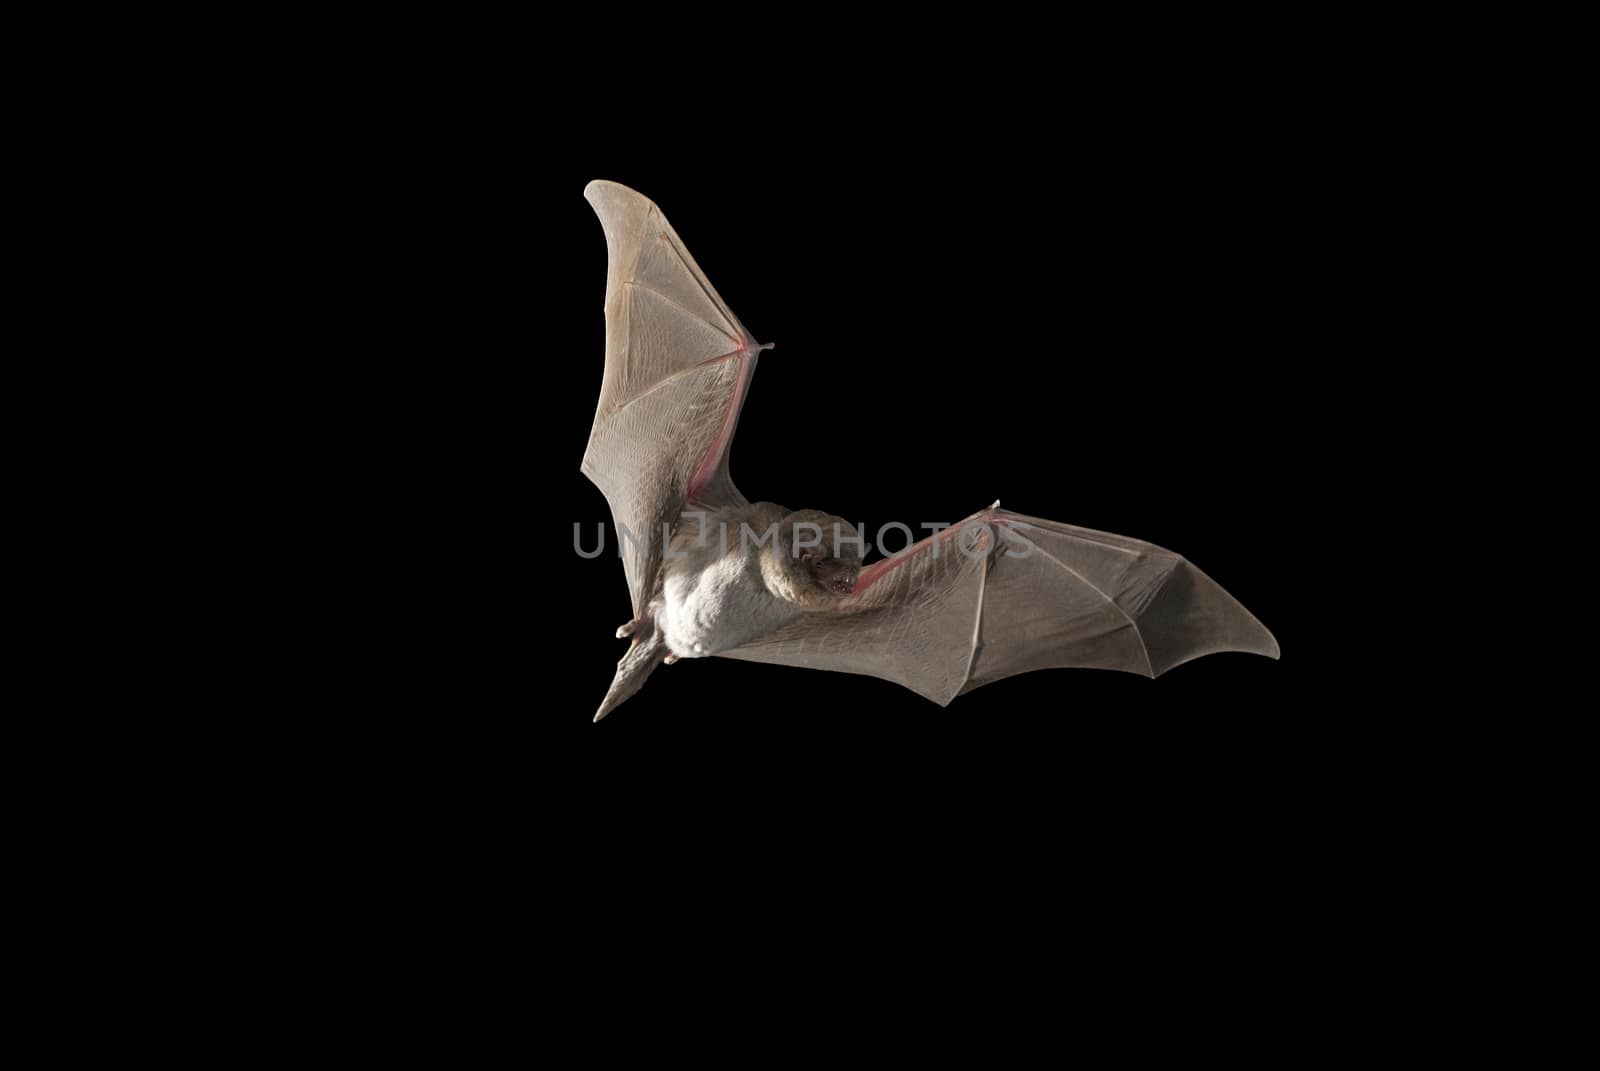 Bat bent common Miniopterus schreibersii, flying in a cave, with by jalonsohu@gmail.com